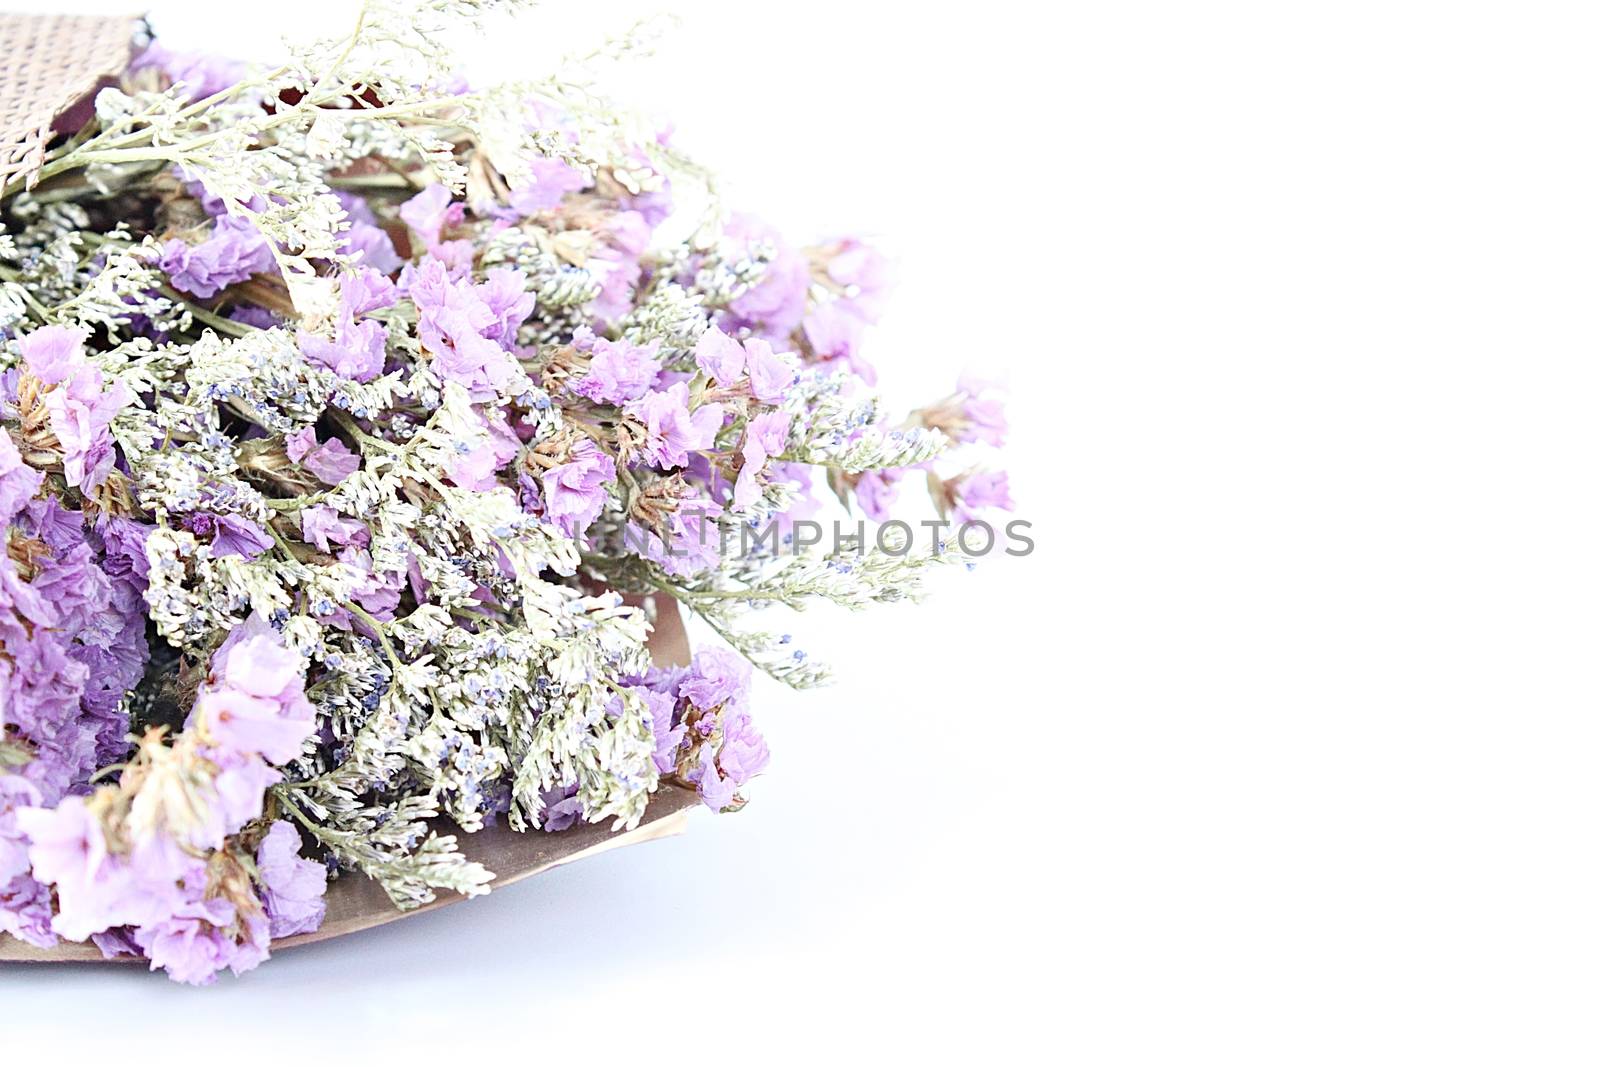 Bouquet of dried wild flowers on white background with copy space by sureeporn